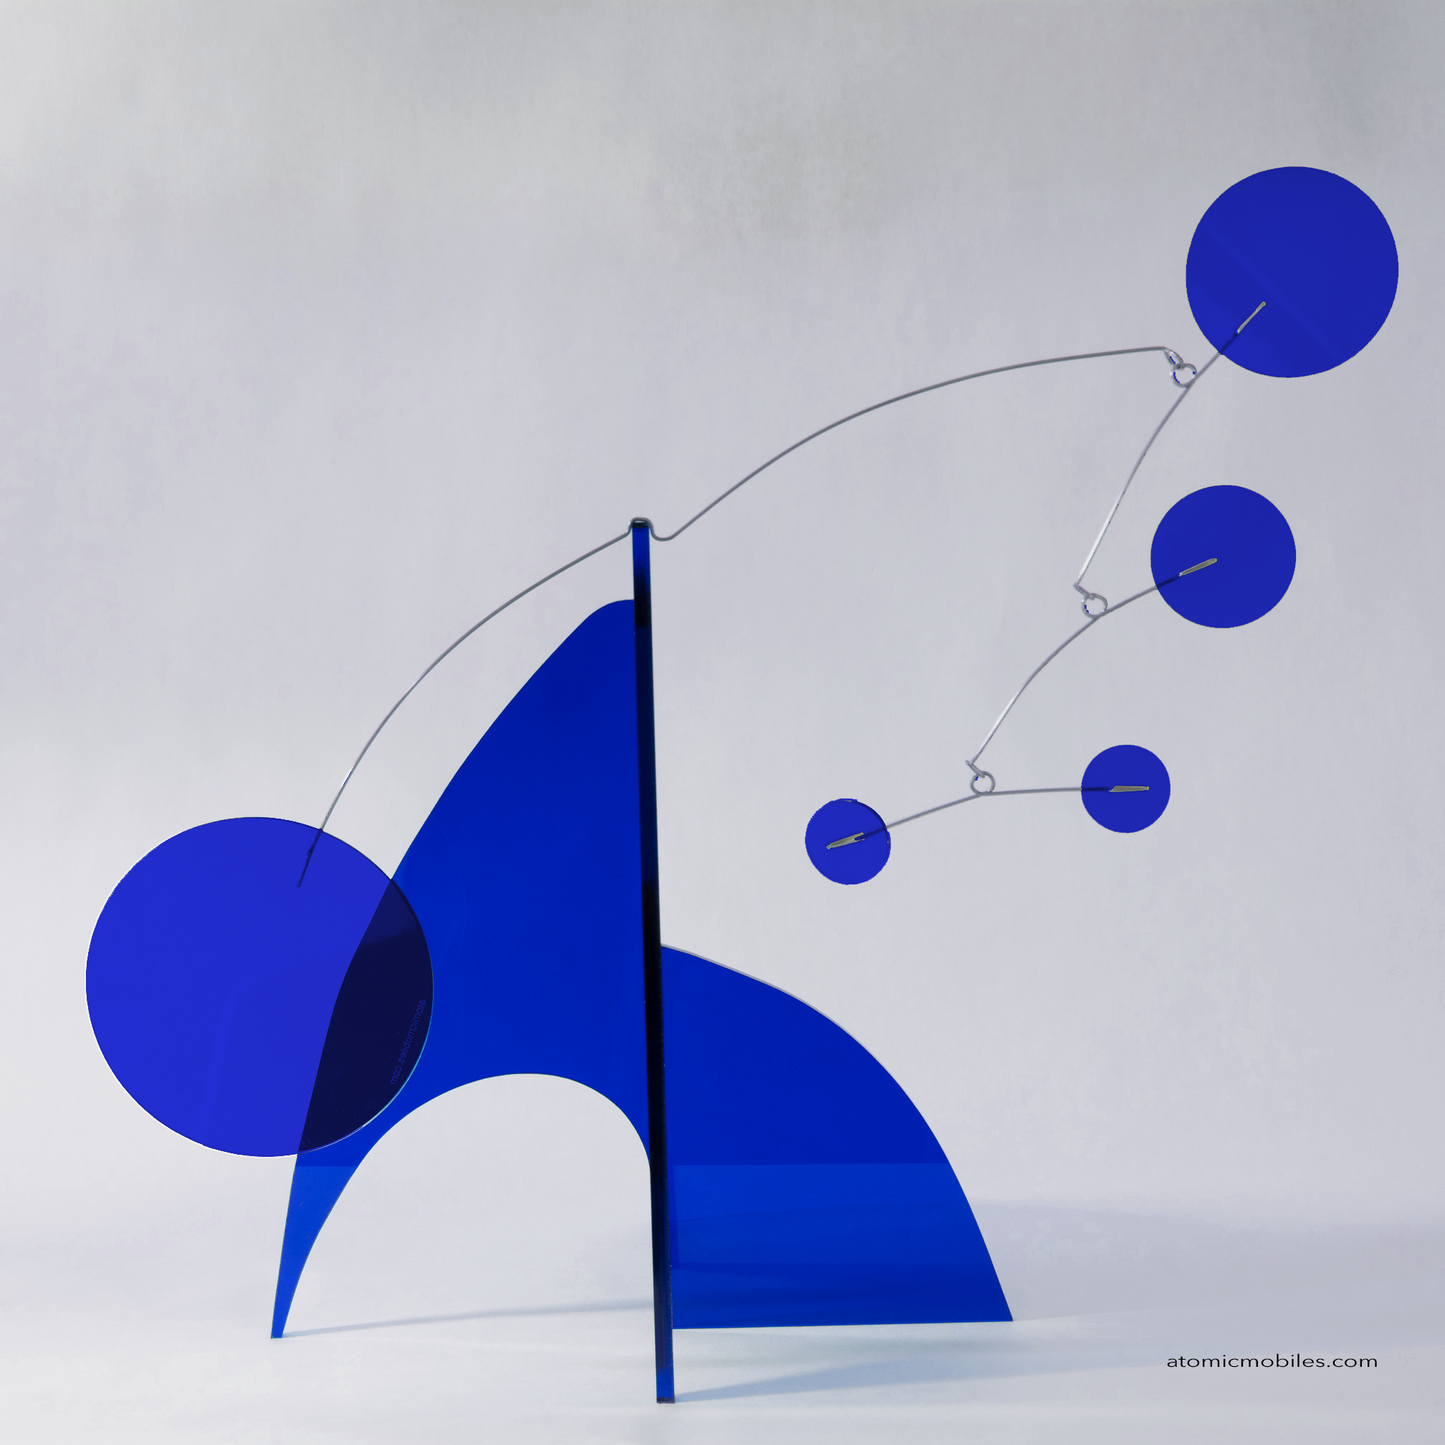 Beautiful Translucent Navy Blue Moderne Art Stabile - mid century modern kinetic art in clear navy blue plexiglass acrylic by AtomicMobiles.com